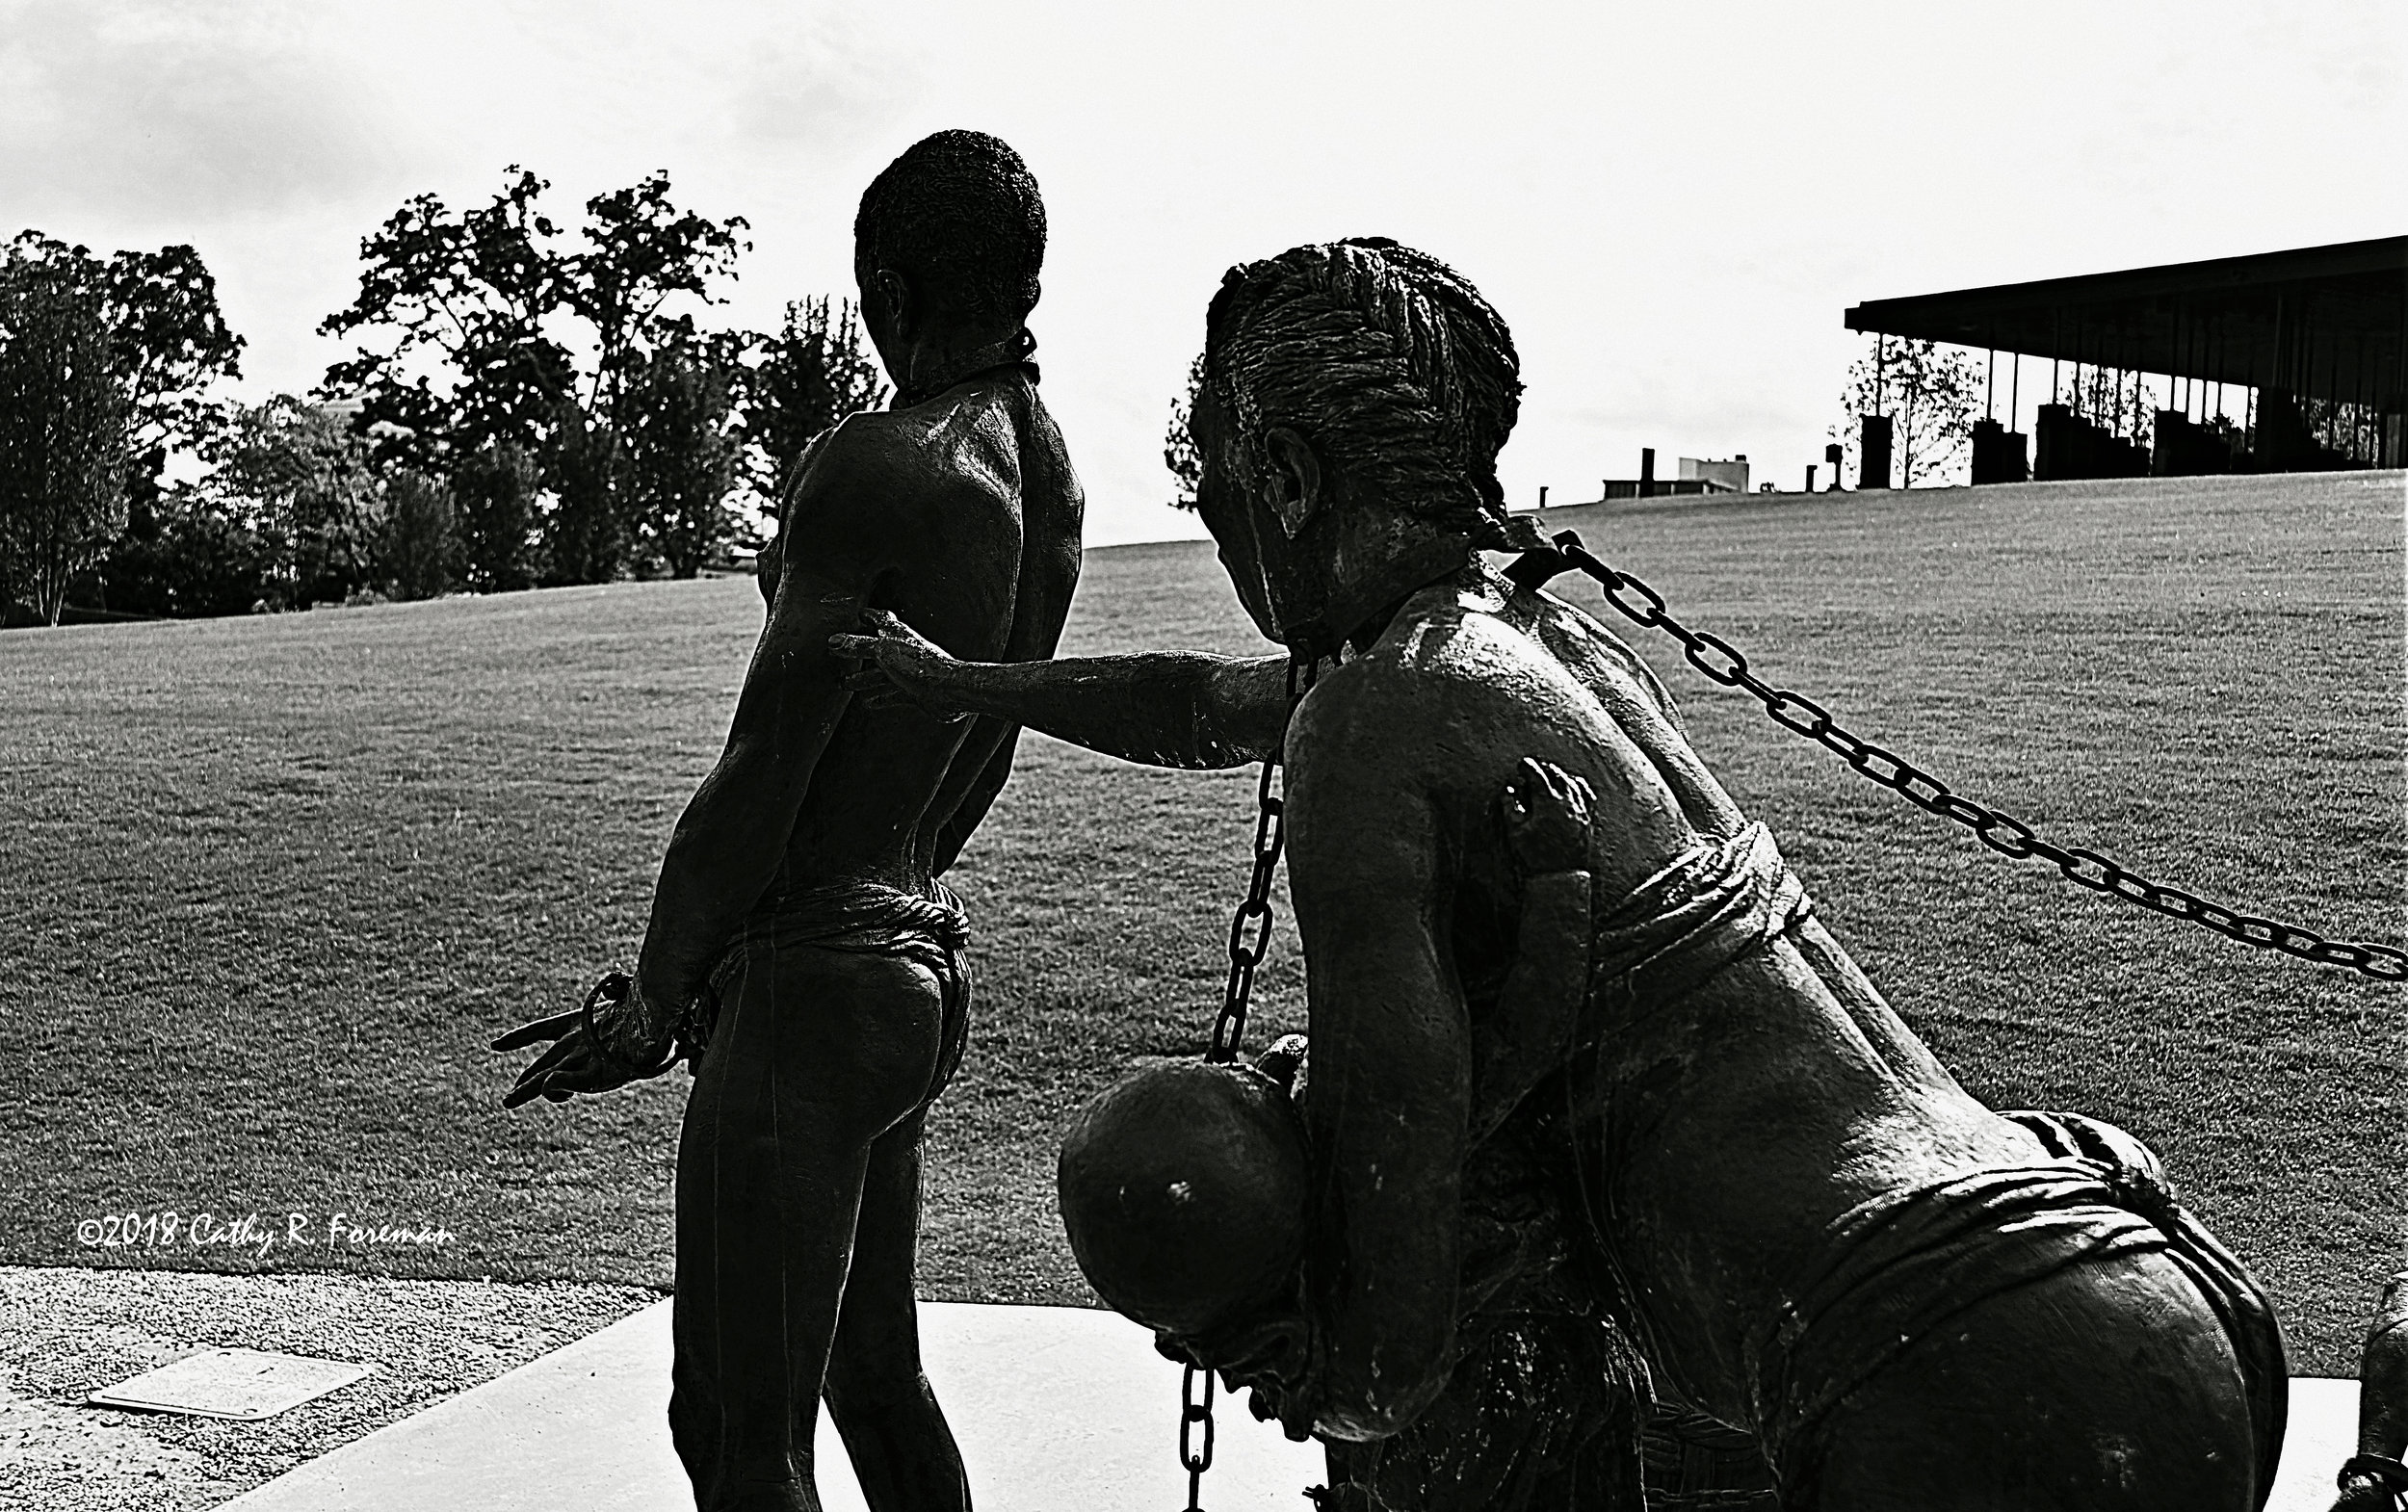 The Lynching Memorial by Cathy R. Foreman